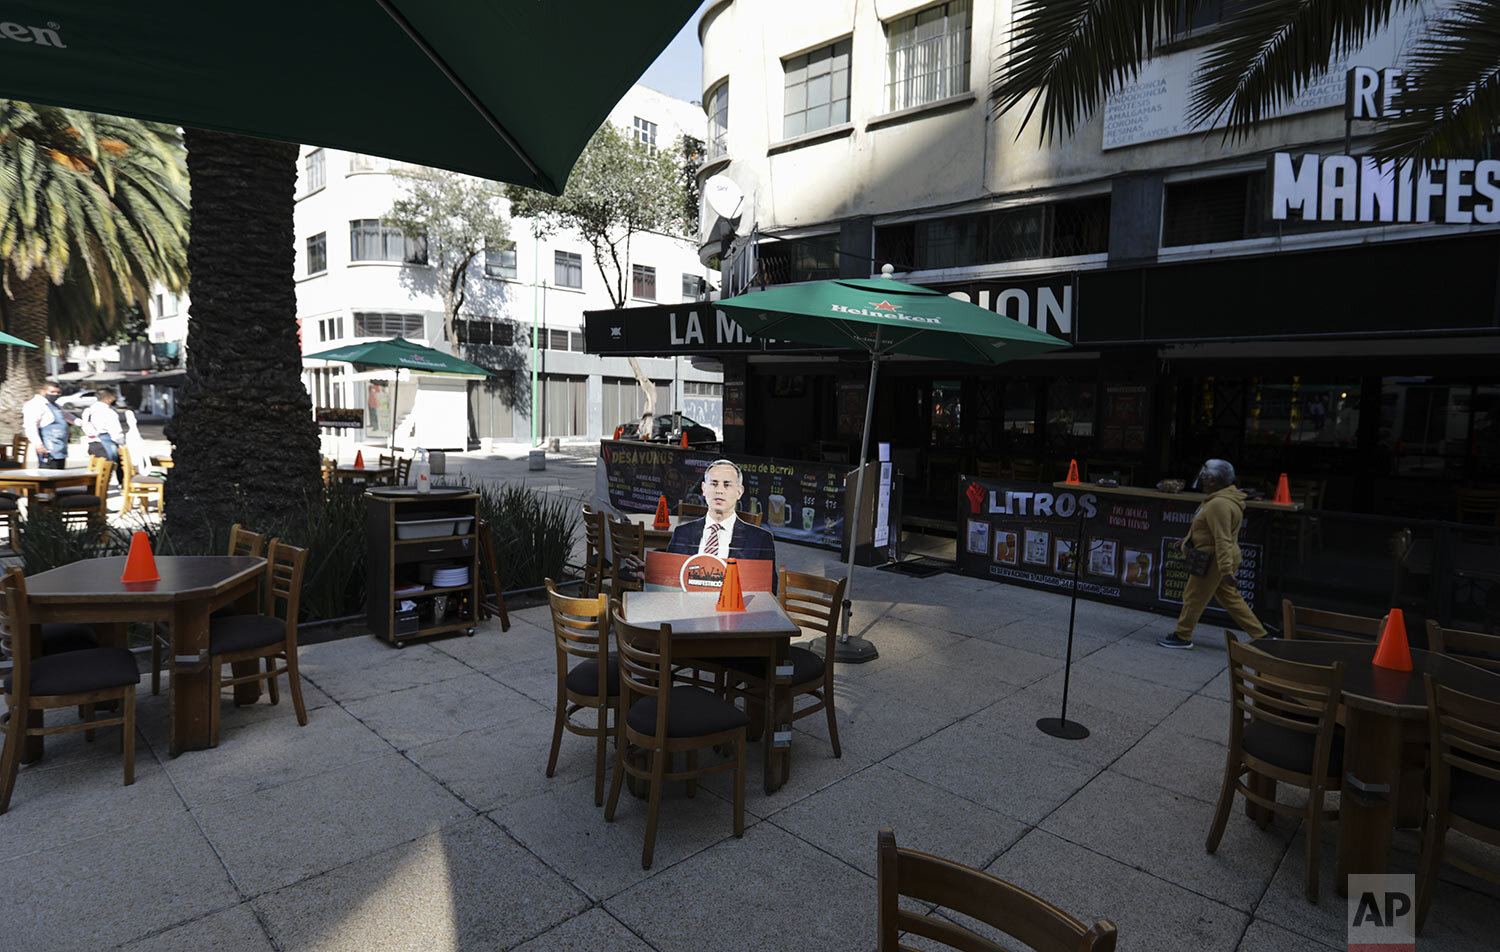  A life-size cutout of Mexican Deputy Health Secretary Hugo Lopez-Gatell is displayed on the patio of an outdoor restaurant in Mexico City, Feb. 4, 2021, as the city eases restrictions amid the COVID-19 "red alert” shutdown, allowing eateries to serv